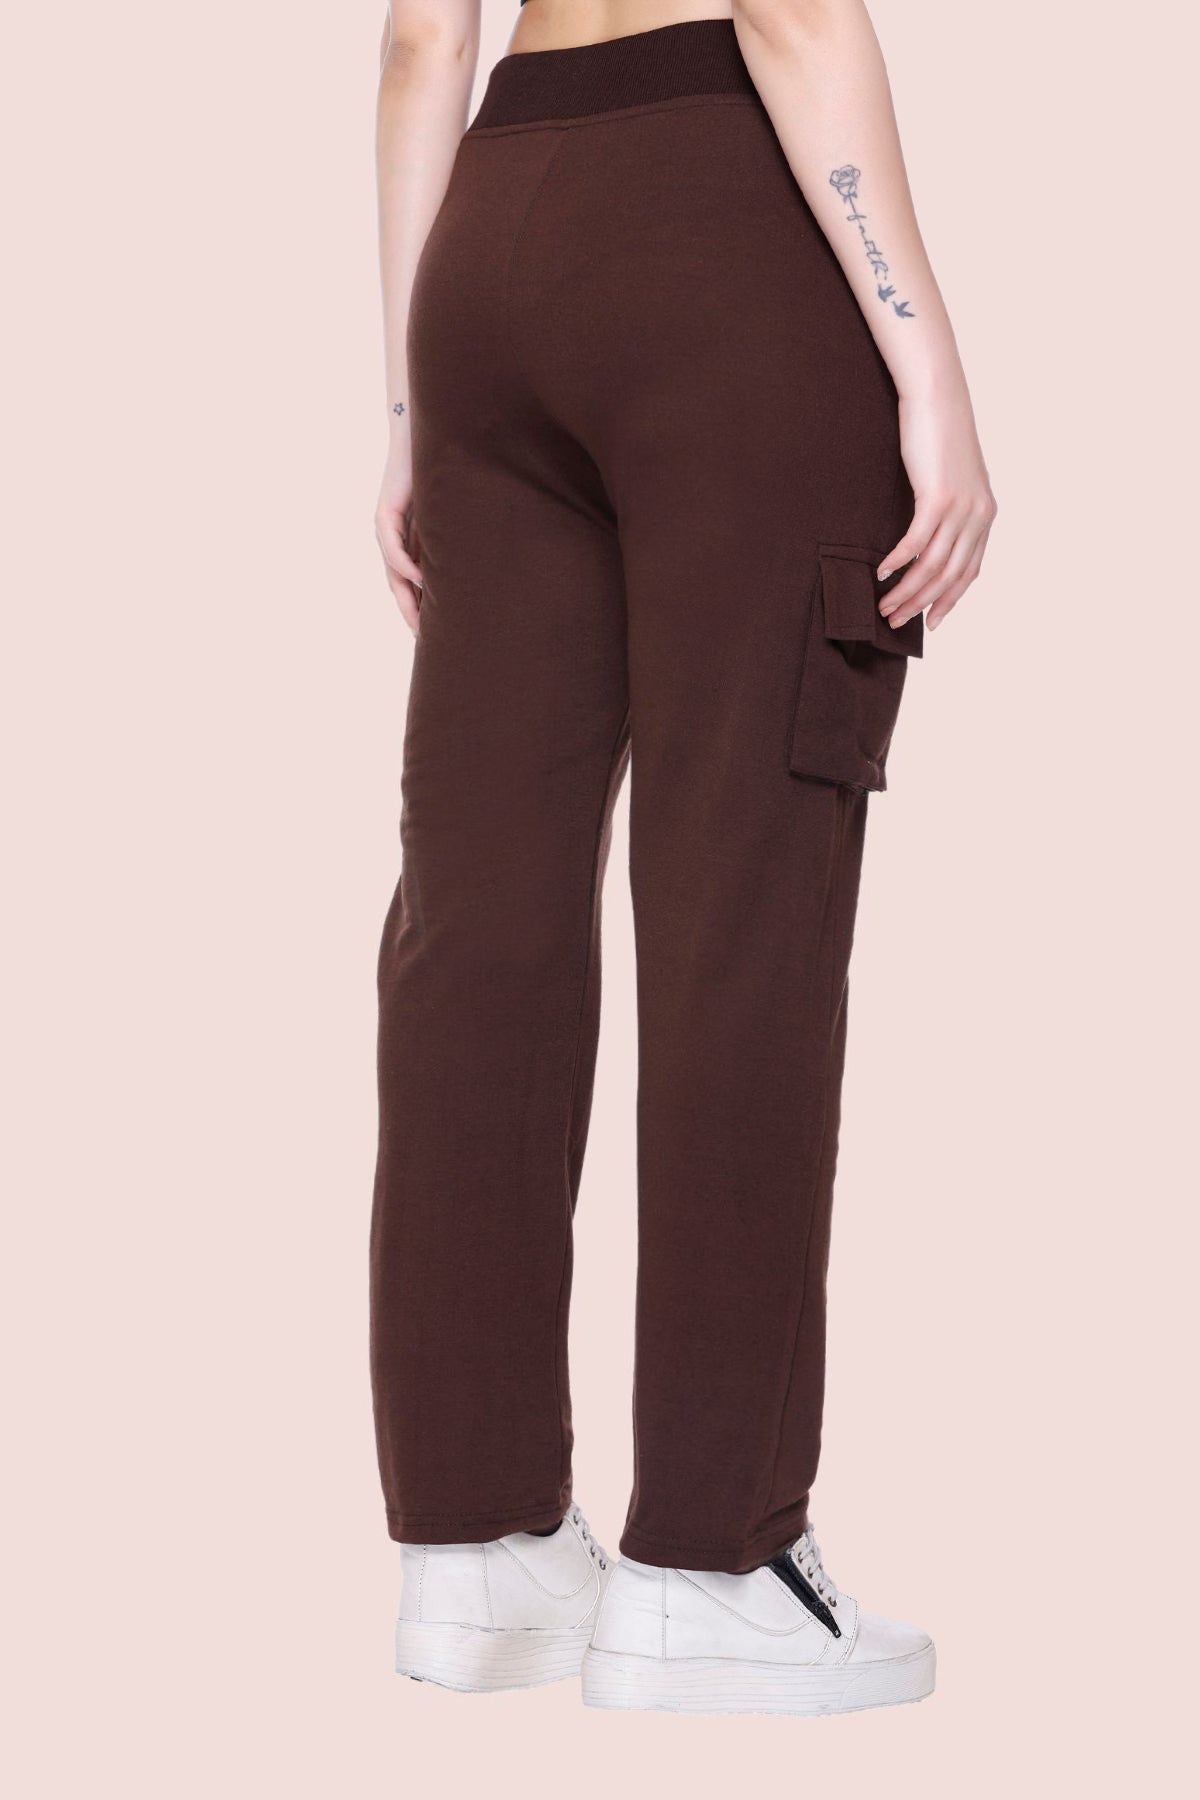 White Moon  Women Solid Coffee Track Pants